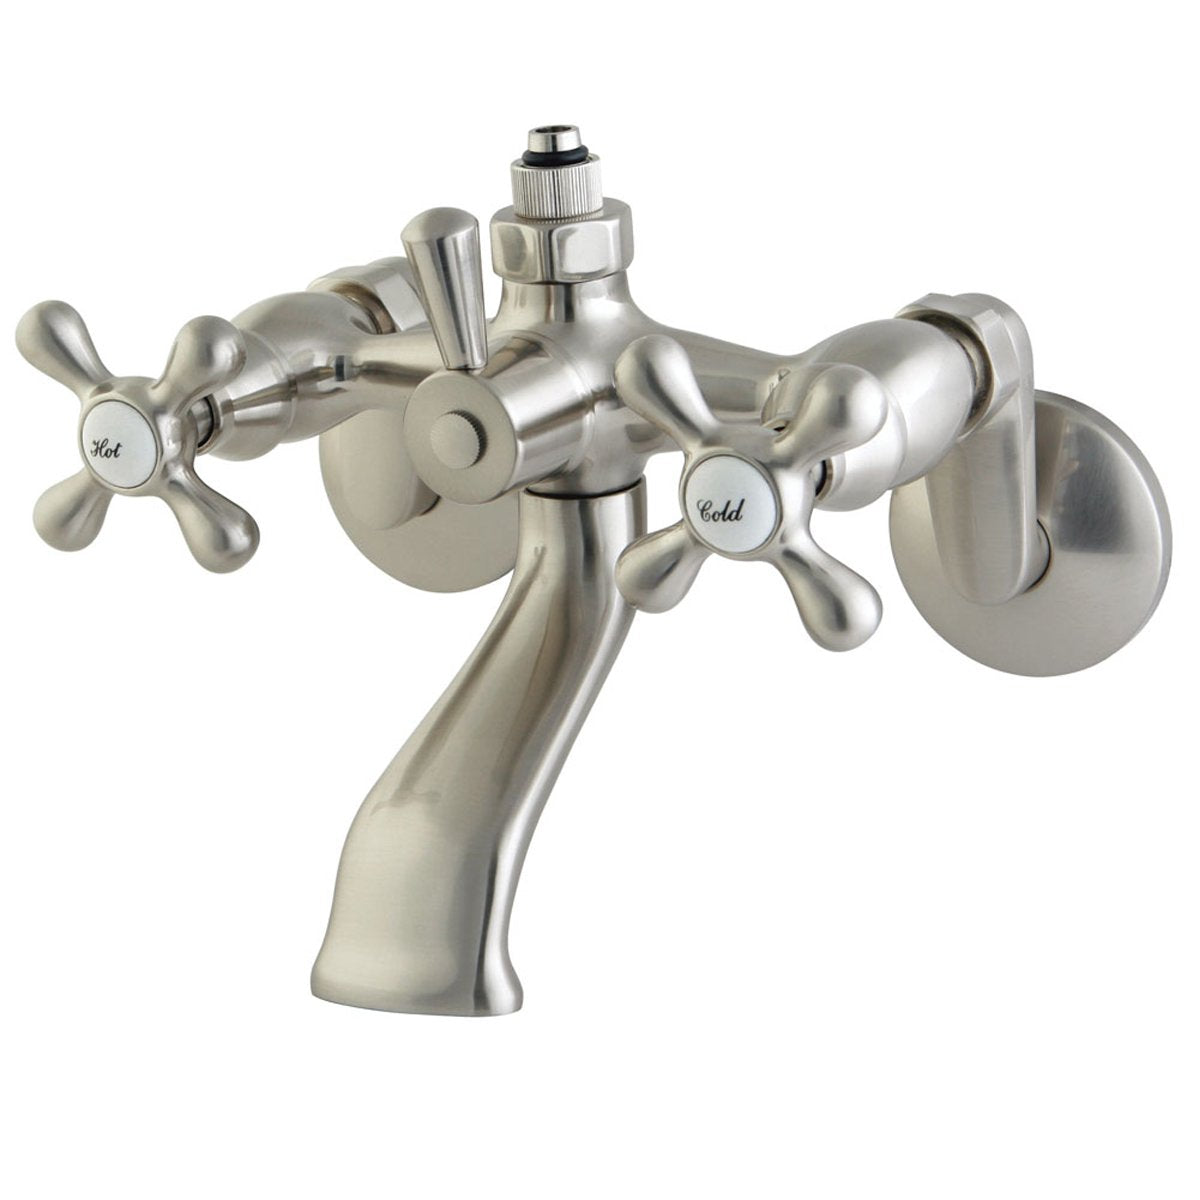 Kingston Brass CC2661 Vintage Wall Mount Tub Faucet with Riser Adapter-Tub Faucets-Free Shipping-Directsinks.